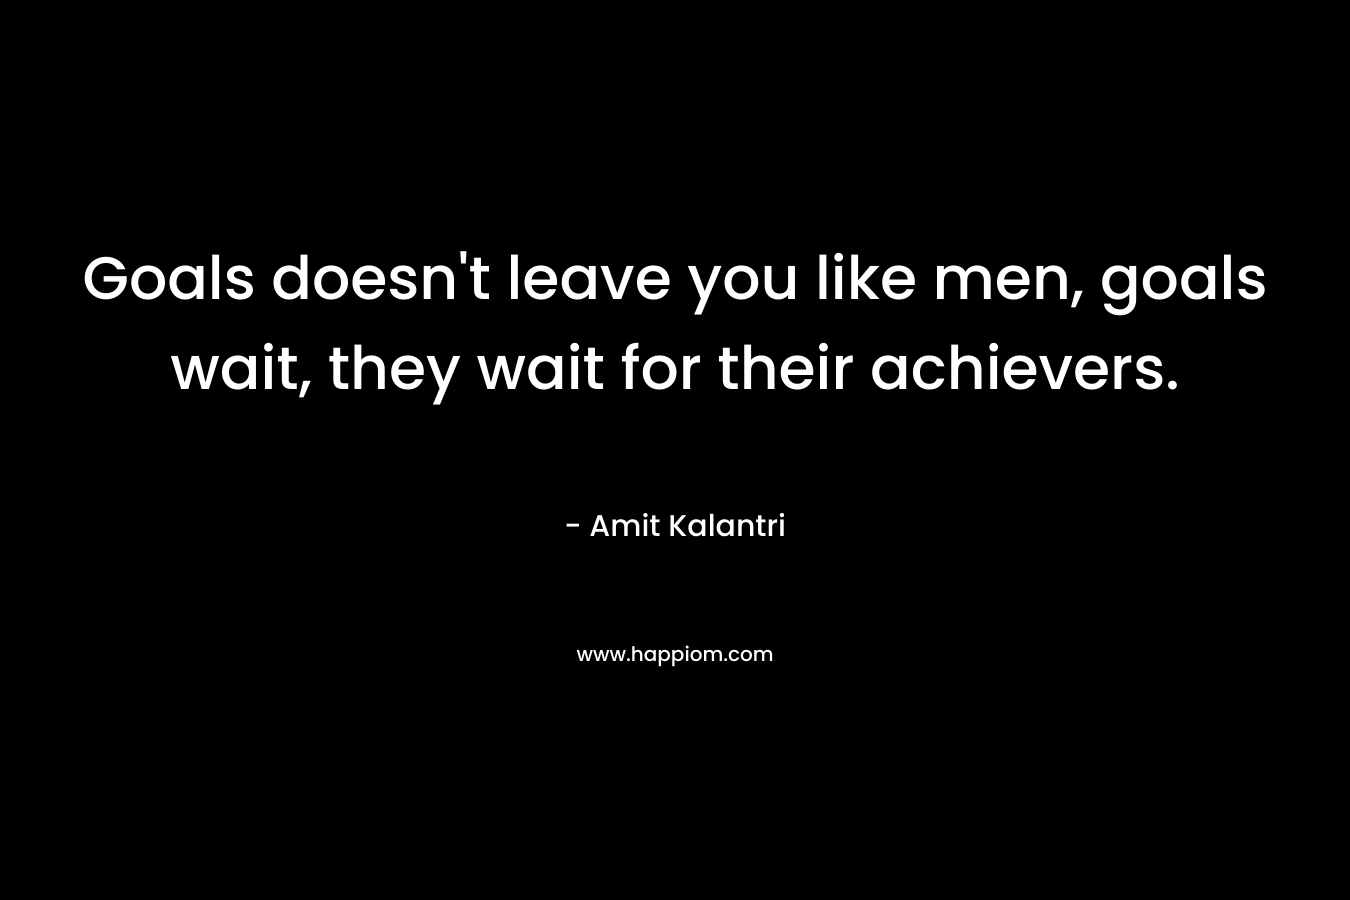 Goals doesn't leave you like men, goals wait, they wait for their achievers.